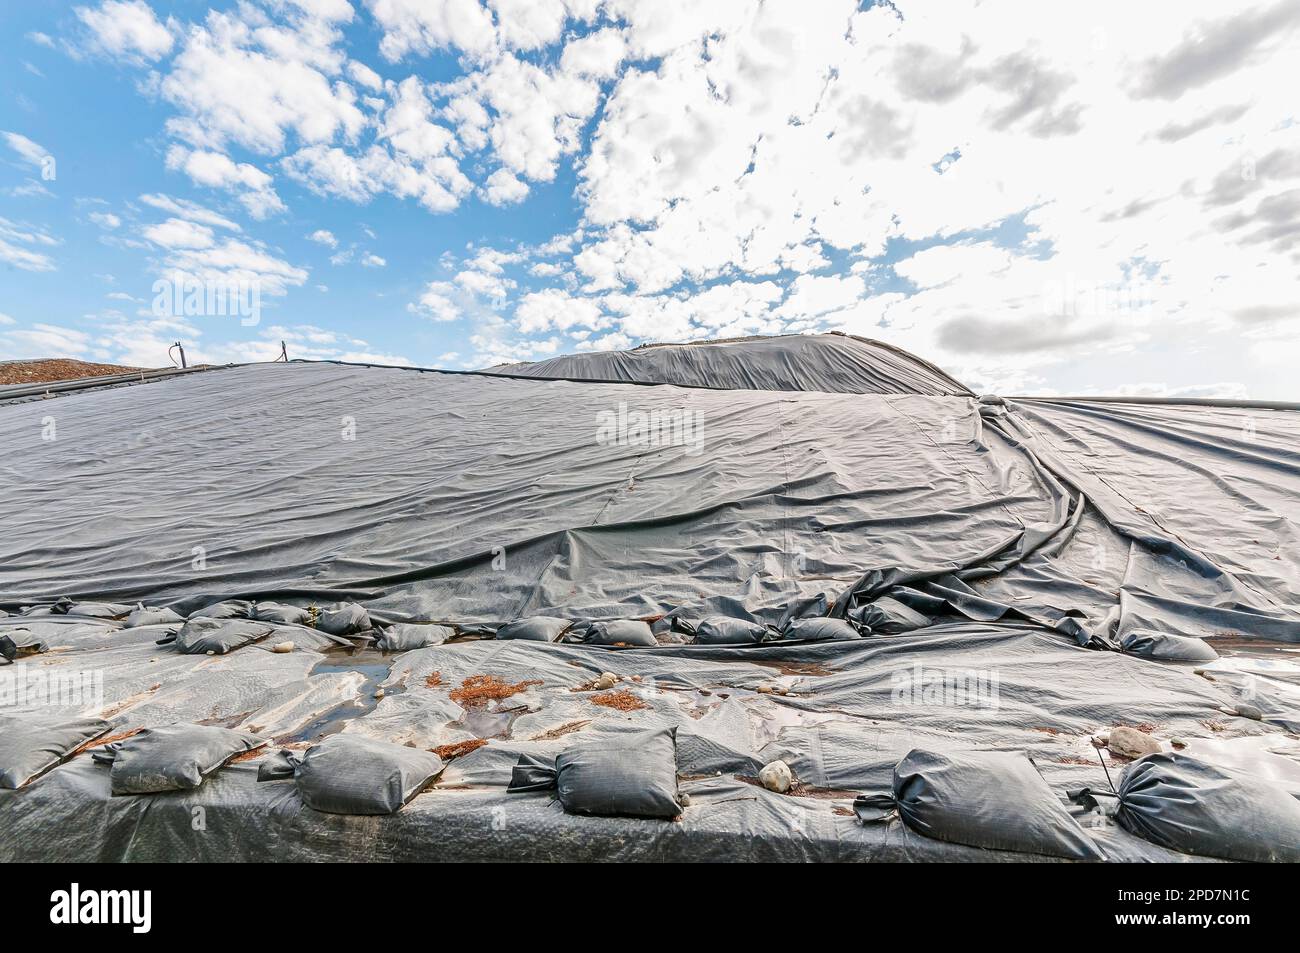 Plastic sheeting or geomembrane with sandbag weights cover hillsides in an active landfill. Stock Photo